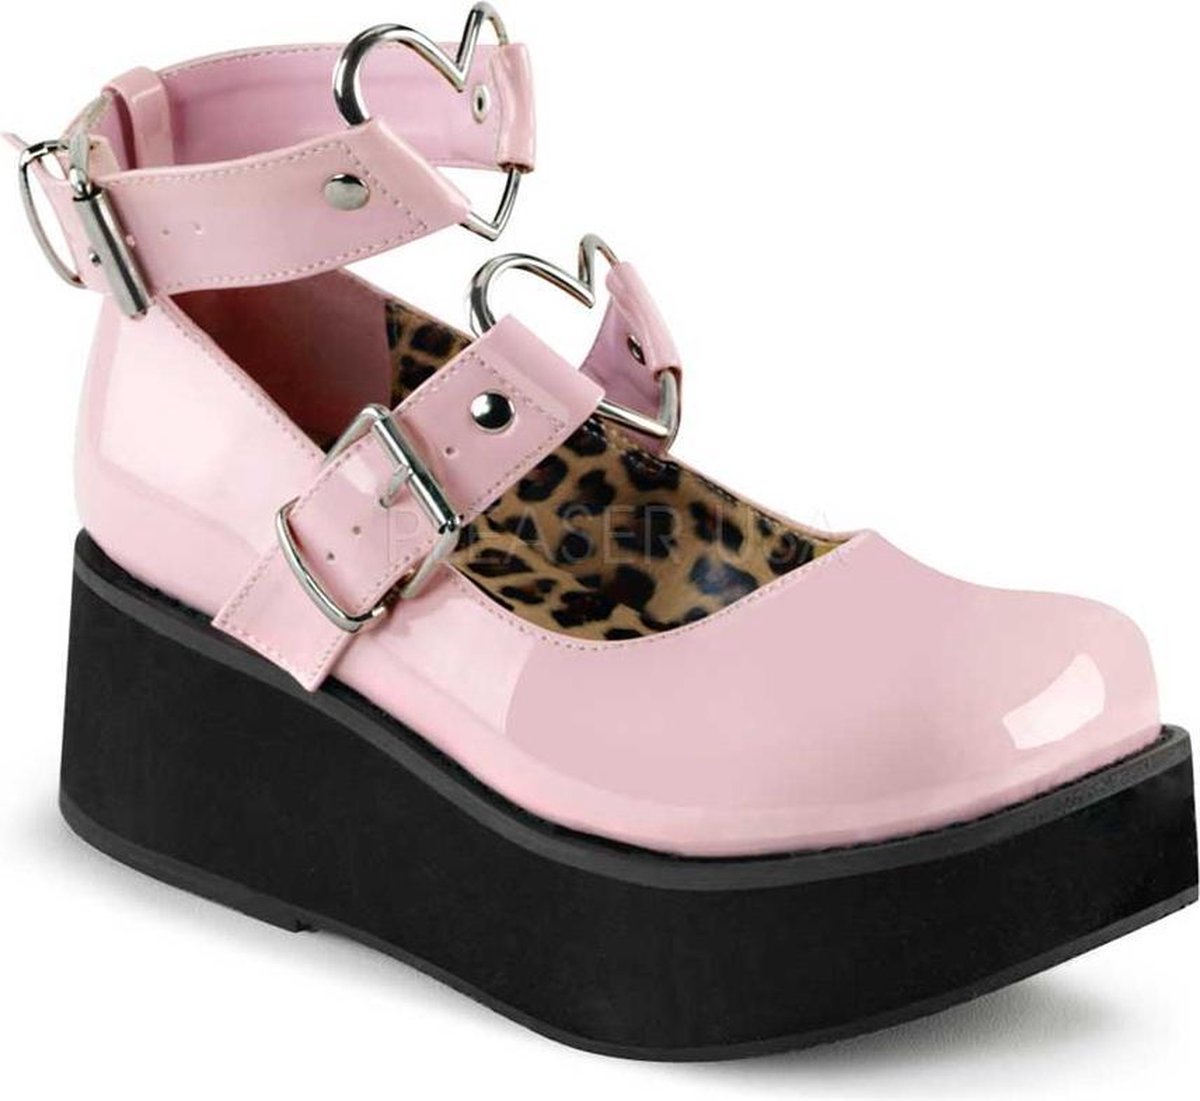 Sprite-02 shoe with ankle straps, buckles and metal heart rings patent pink - (EU 42,5 = US 12) - Demonia